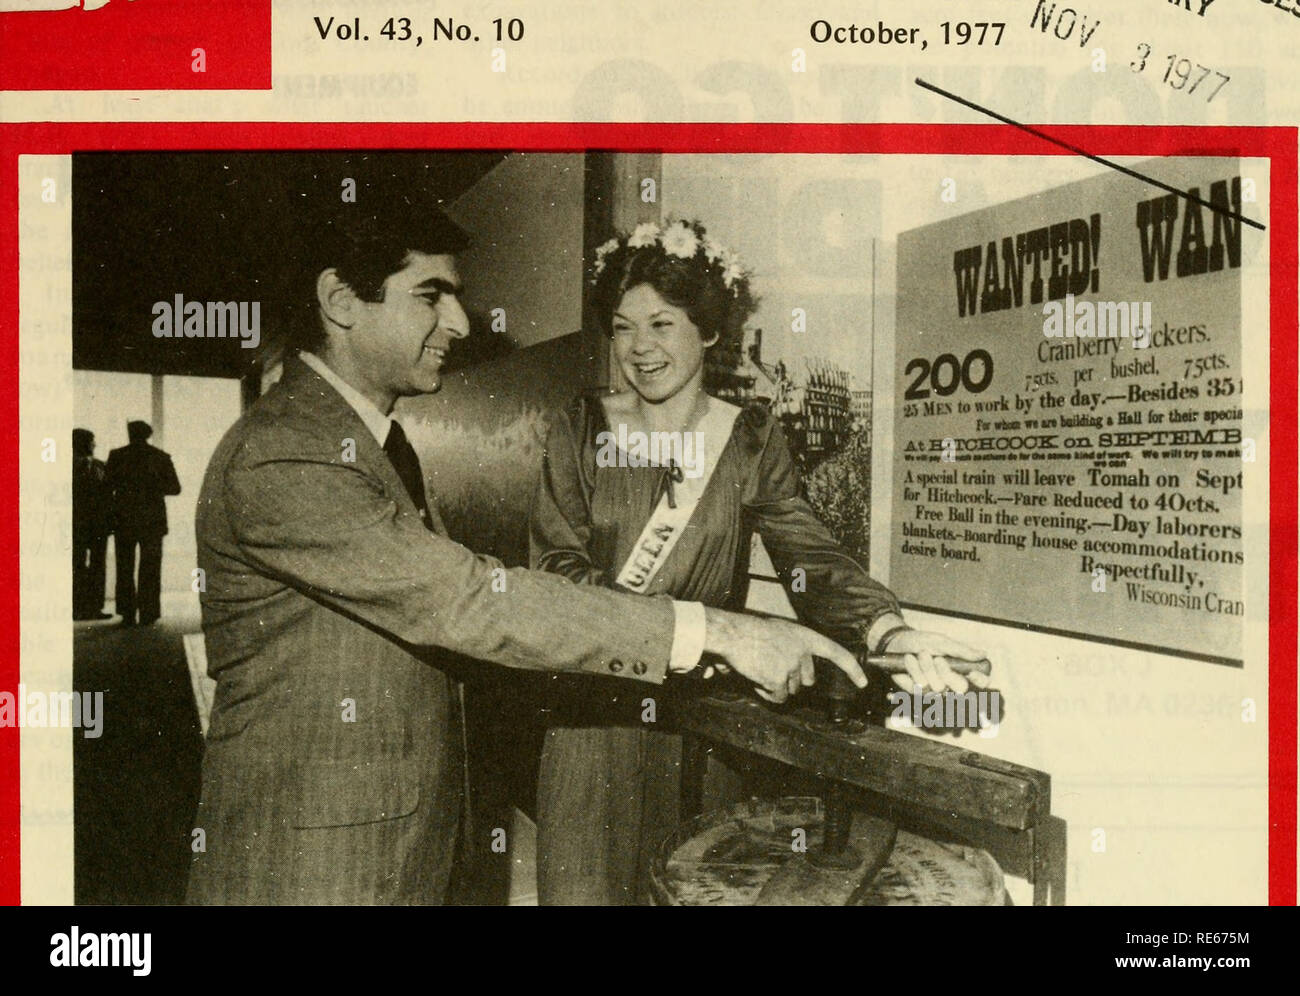 . Cranberries; : the national cranberry magazine. Cranberries. CRANBERRIES THE IMATIOIMAL CRANBERRY MAGAZINE Vol. 43, No. 10 October. 1977 ^&gt;Vv. S/r '^^^4?^ce^. Massachusetts Governor Michael Dukakis joins 1977 &quot;Cranberry Festival Queen&quot; Bonnie Willard in turning old-fashioned barrel-header for sealing tops of cranberry barrels-one of the many colorful artifacts on exhibit at the new &quot;Cranberry World&quot; Museum in Plymouth, Mass. CT. //I This Issue ... ^ ^ (-5 OREGON GROWER FINDS WATER .^i .l&quot; WASHINGTON SCIENTISTS ANSWER QUESTIONS .^r^ .5^ MARKETING ORDER HEARING ?^  Stock Photo